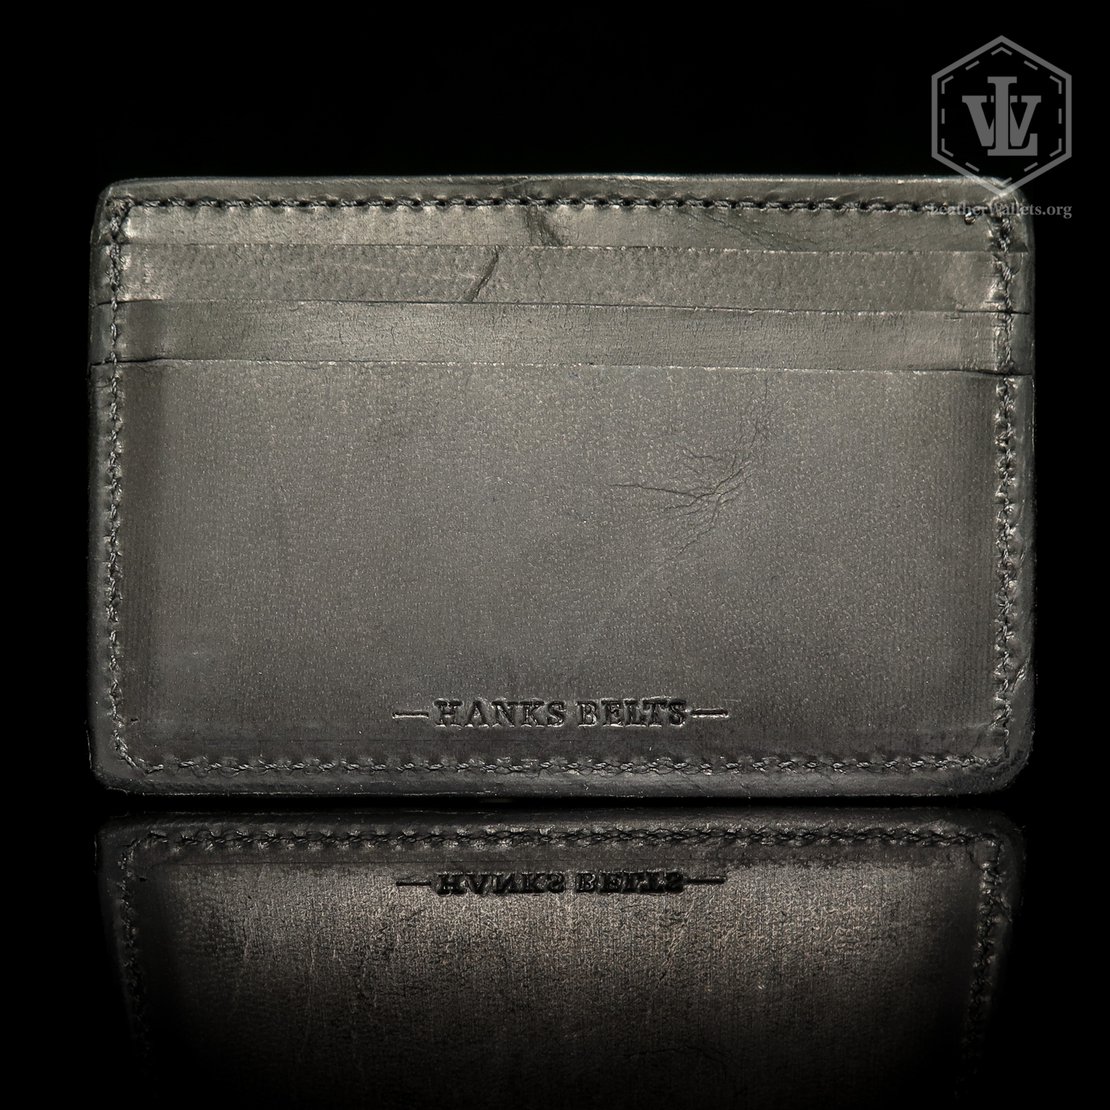 A review of the Hanks Belts Money Clip Cardholder | LeatherWallets.org